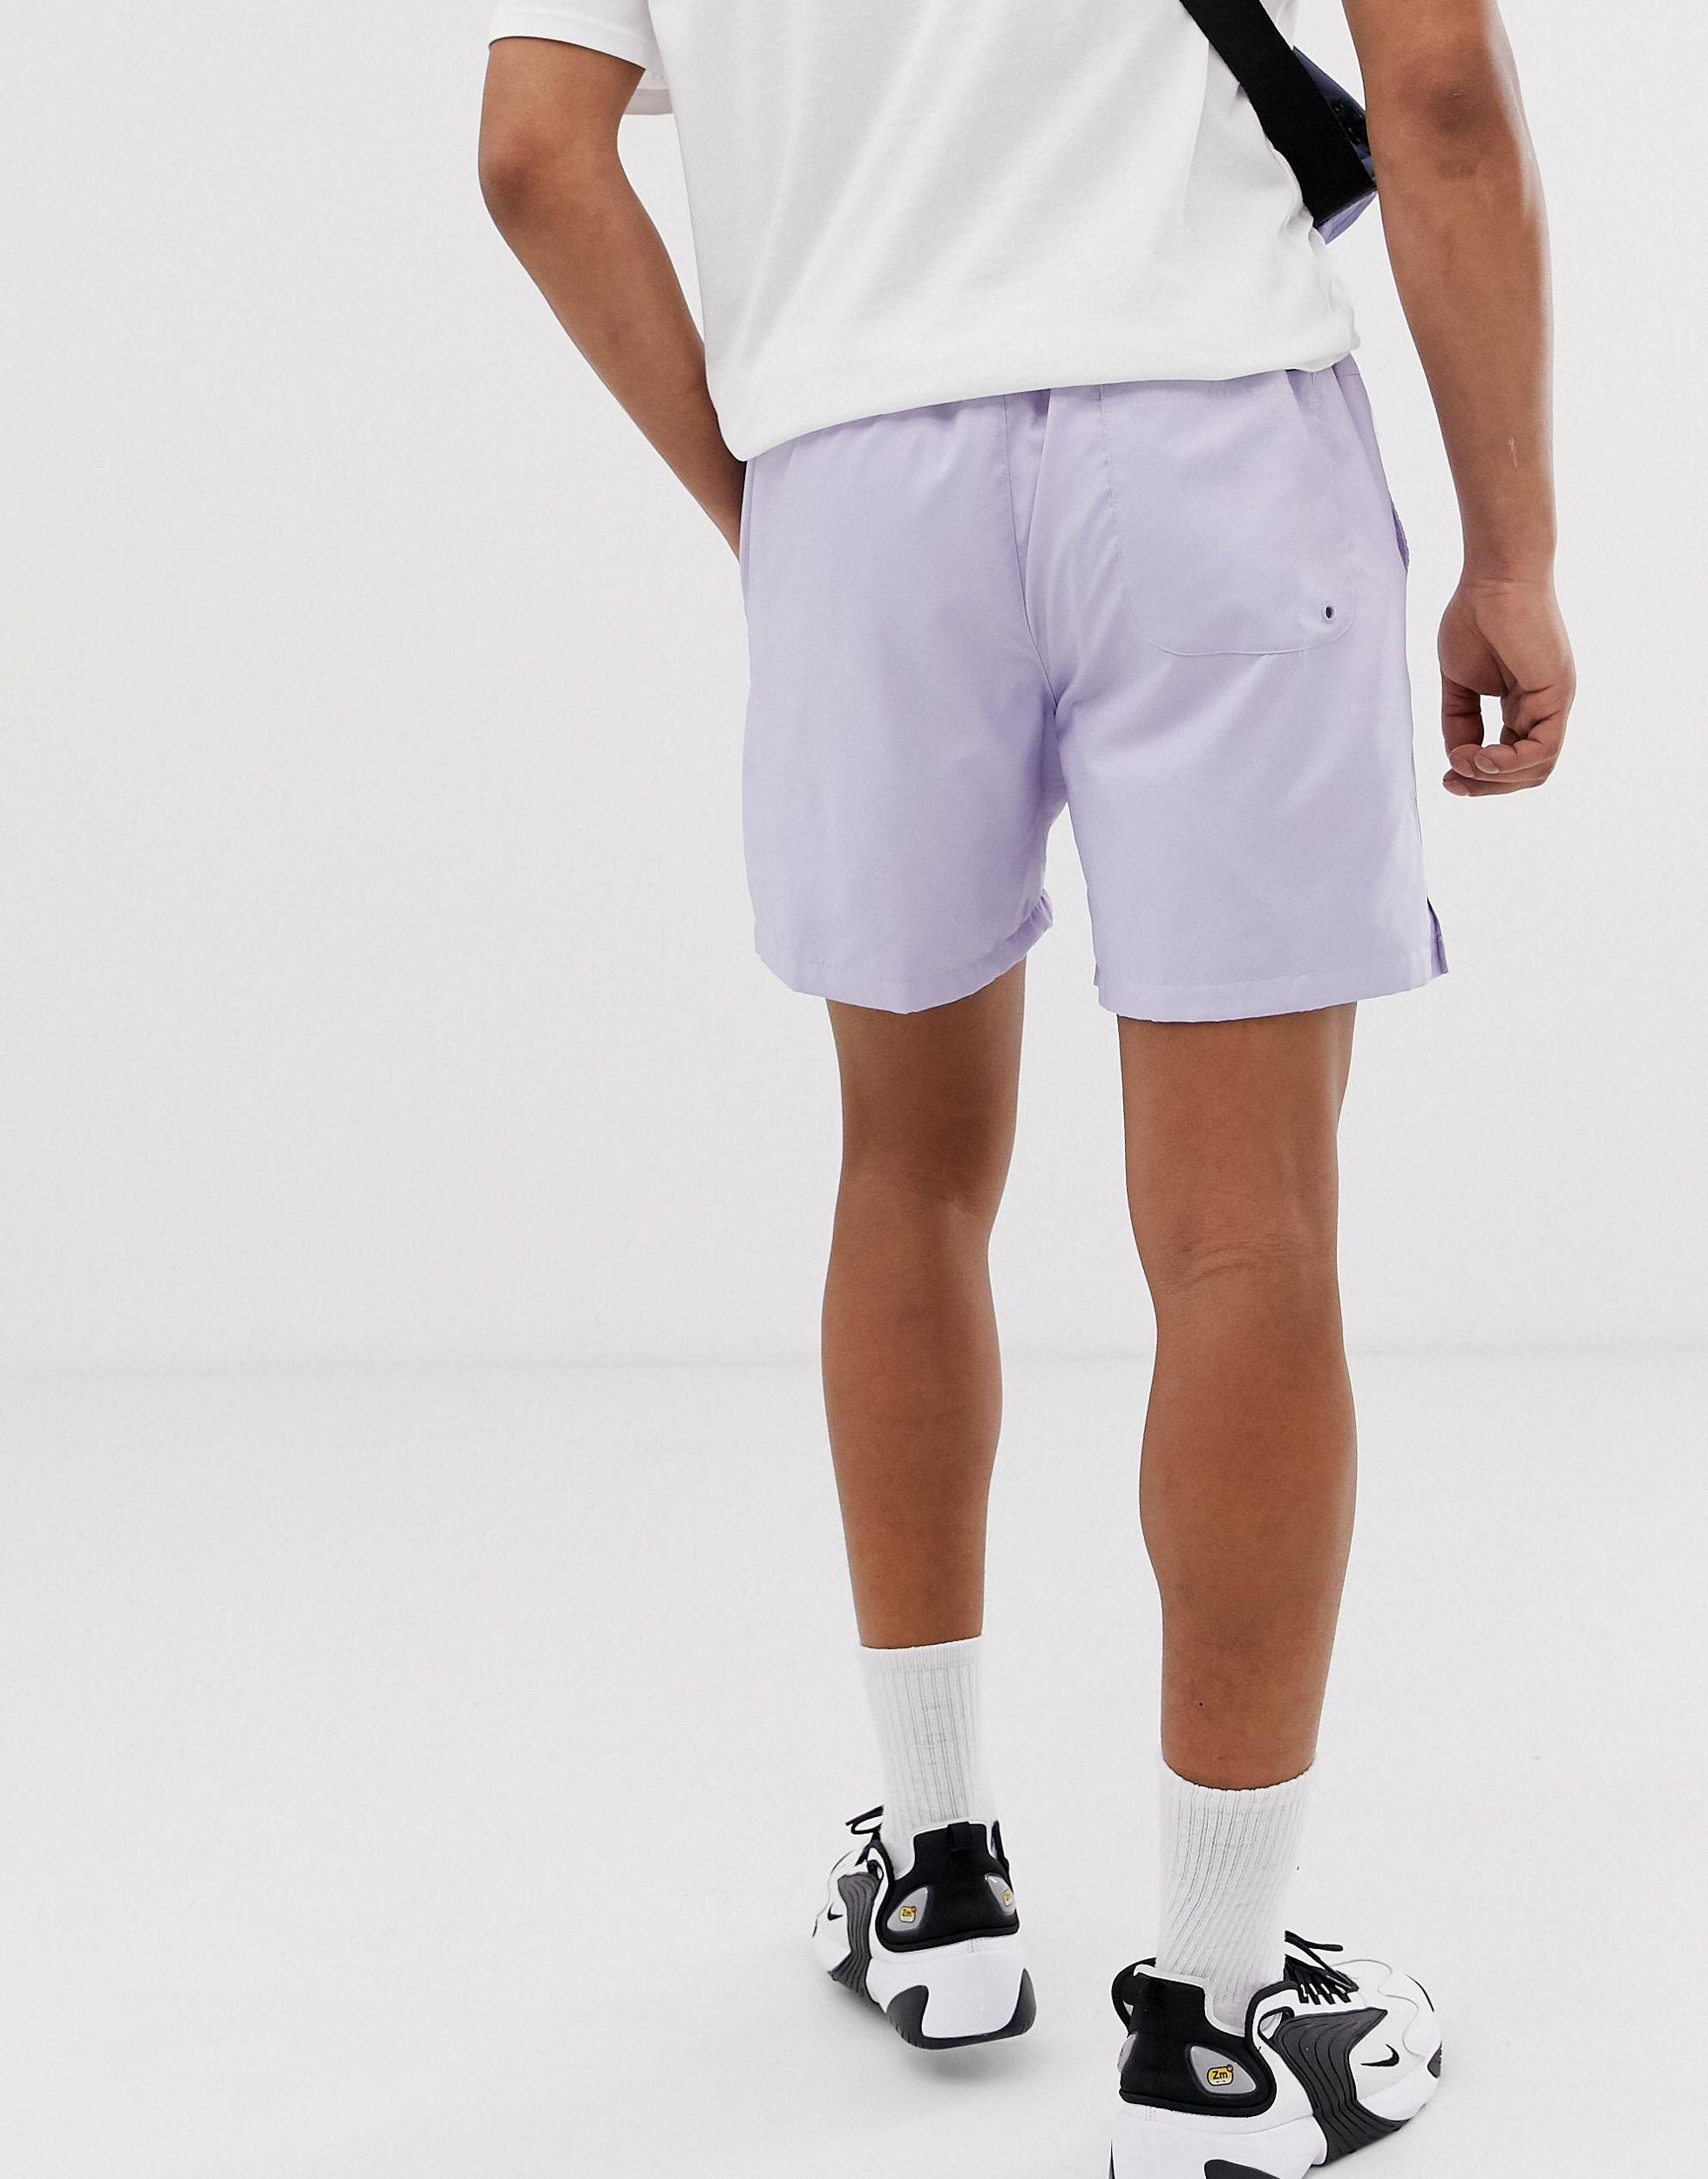 nike woven logo shorts Sale,up to 50% Discounts